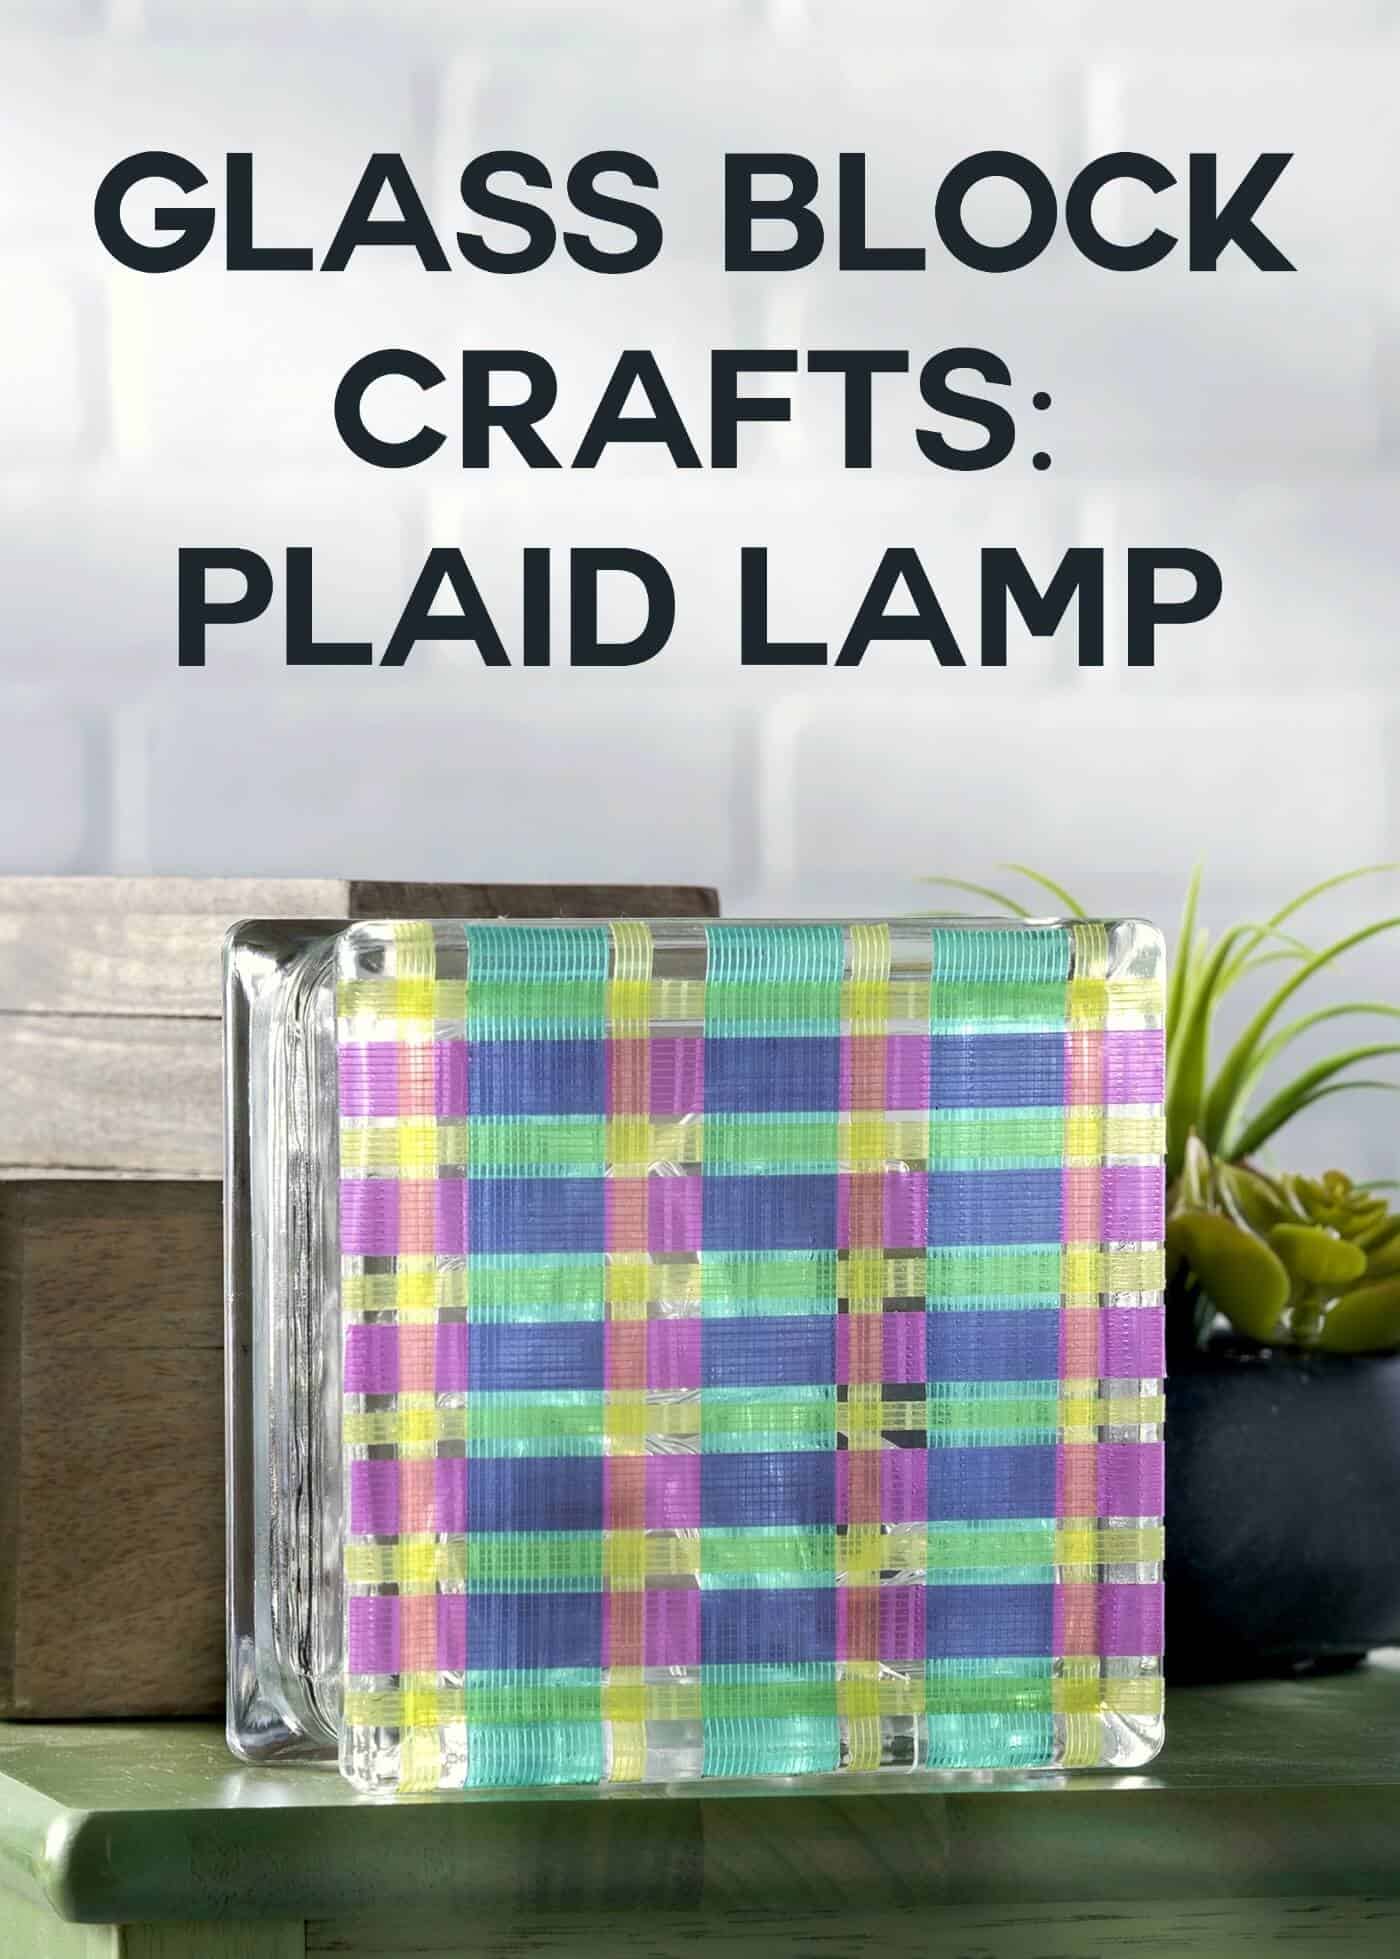 Glass block crafts are so fun and easy! Grab your Duck Tape and glass block from the craft store and make this simple plaid lamp. Perfect for a kids' room!